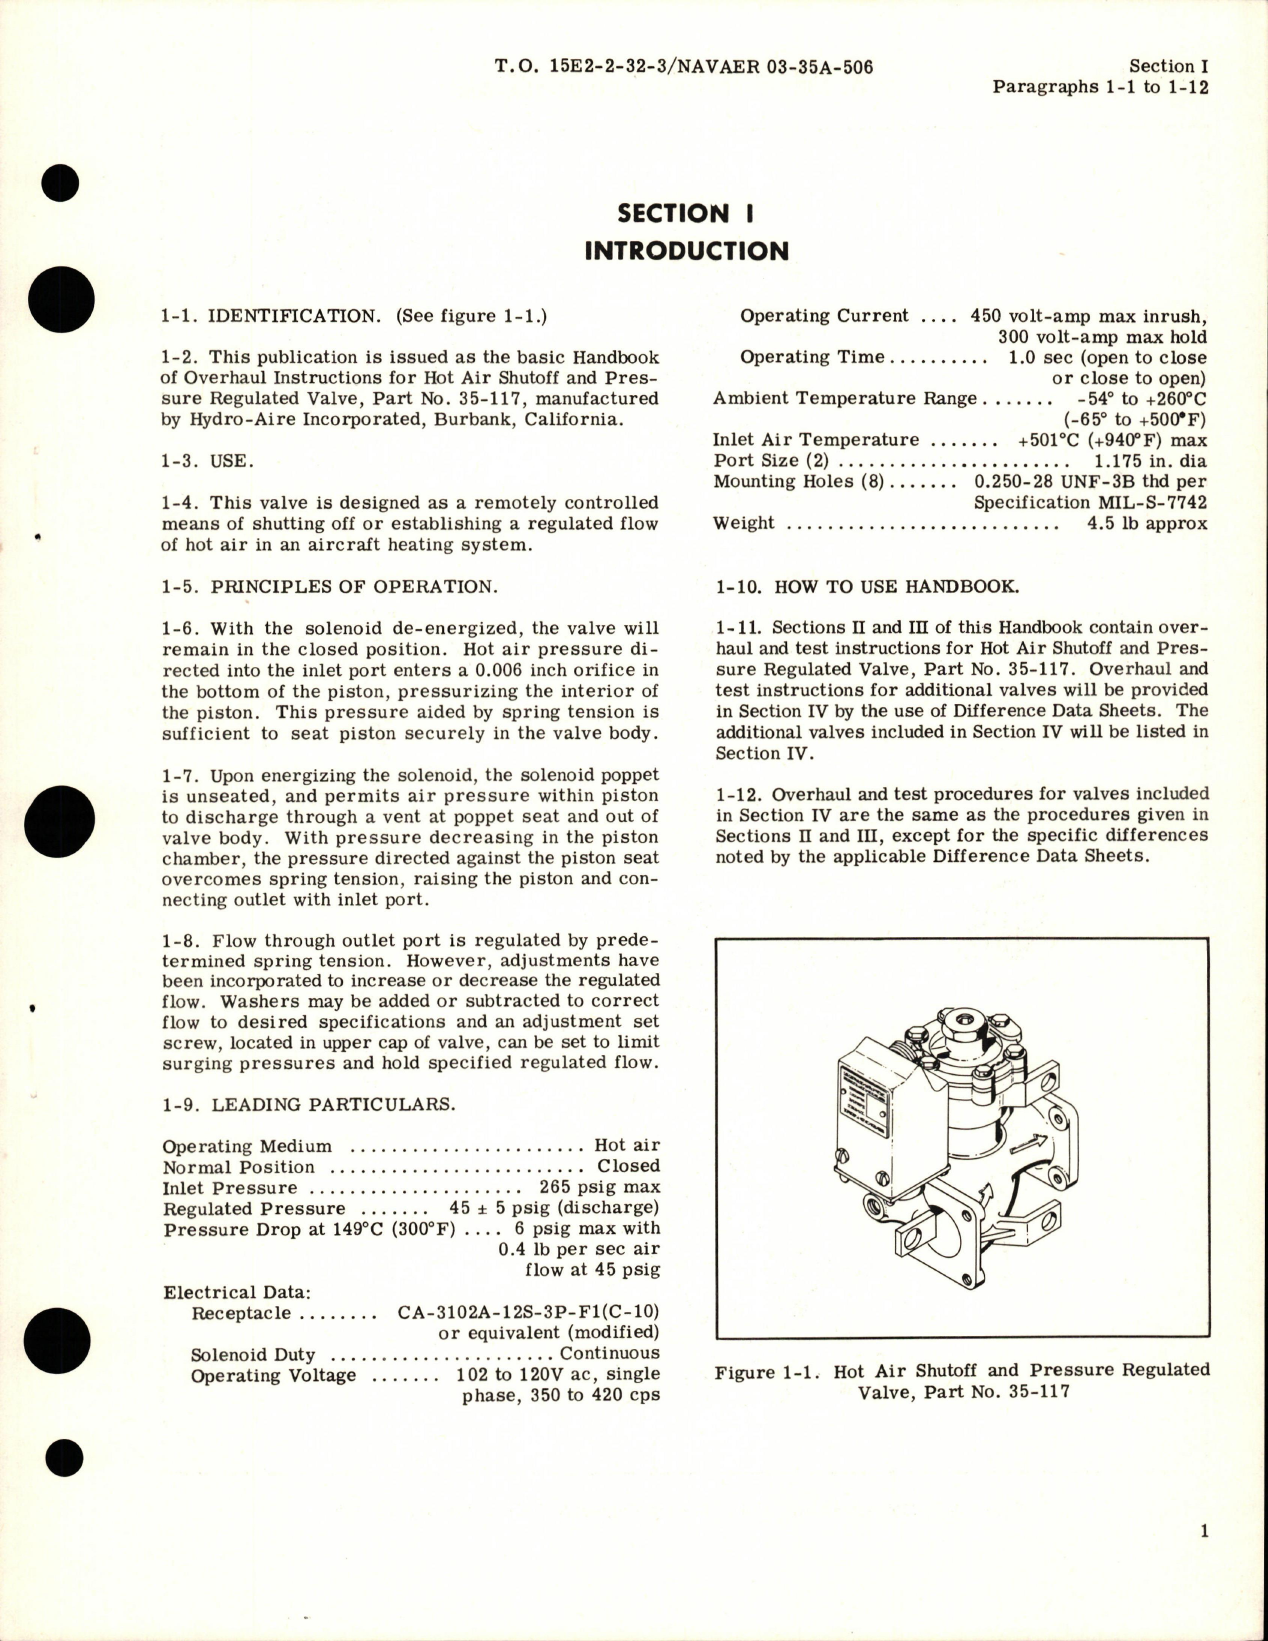 Sample page 5 from AirCorps Library document: Overhaul Instructions for Hot Air Shutoff and Pressure Regulated Valve - 35-117